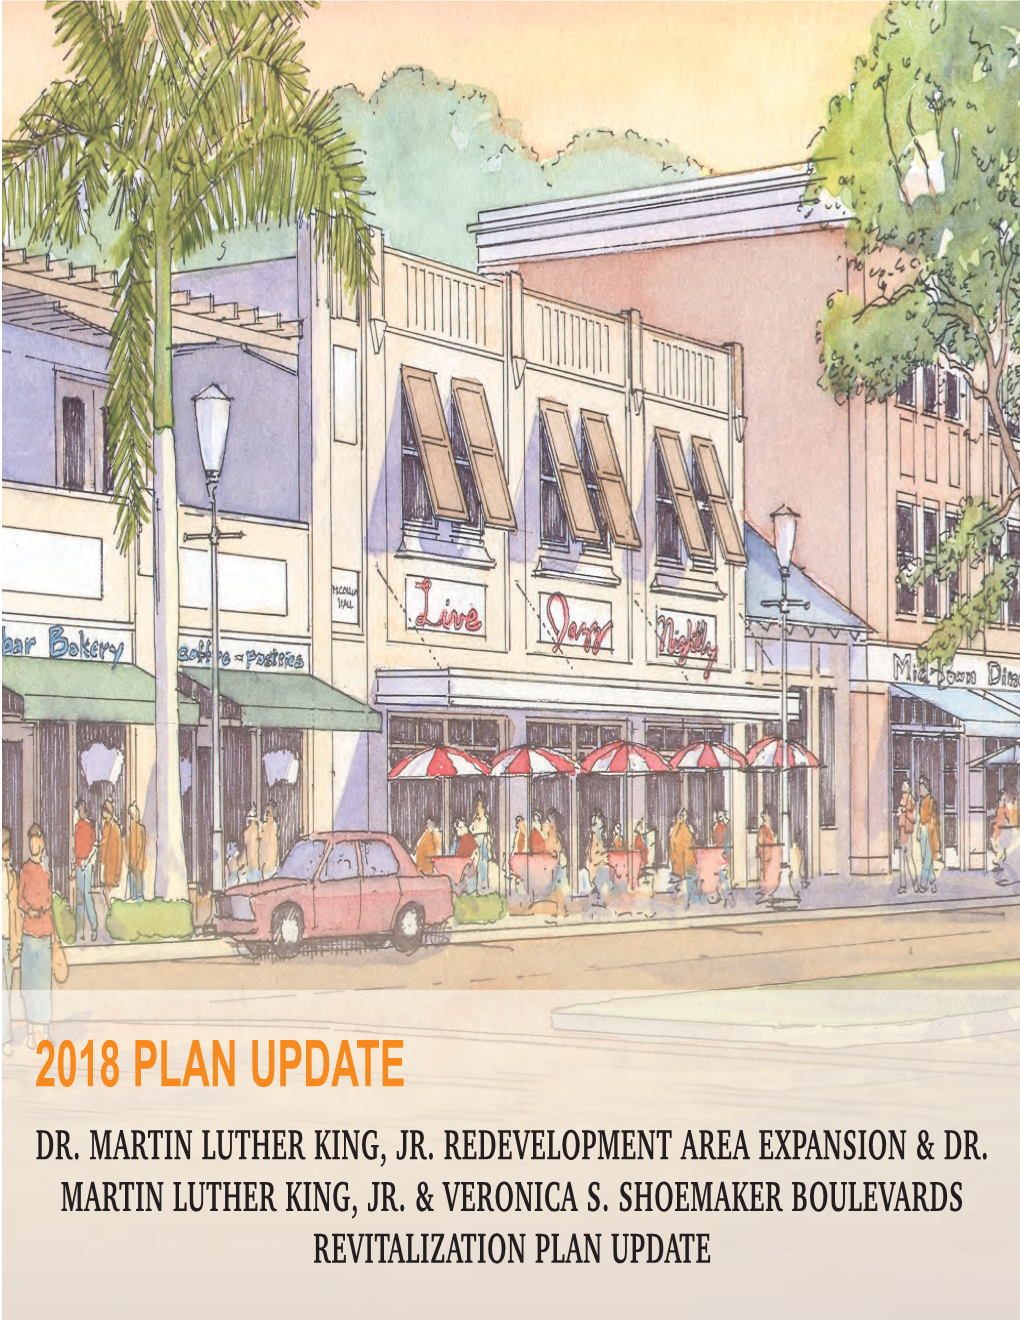 Redevelopment Plan Update Which Will Identify Action Steps Necessary to Support Continued Include the Neighboring Dunbar/Michigan Redevelopment Area